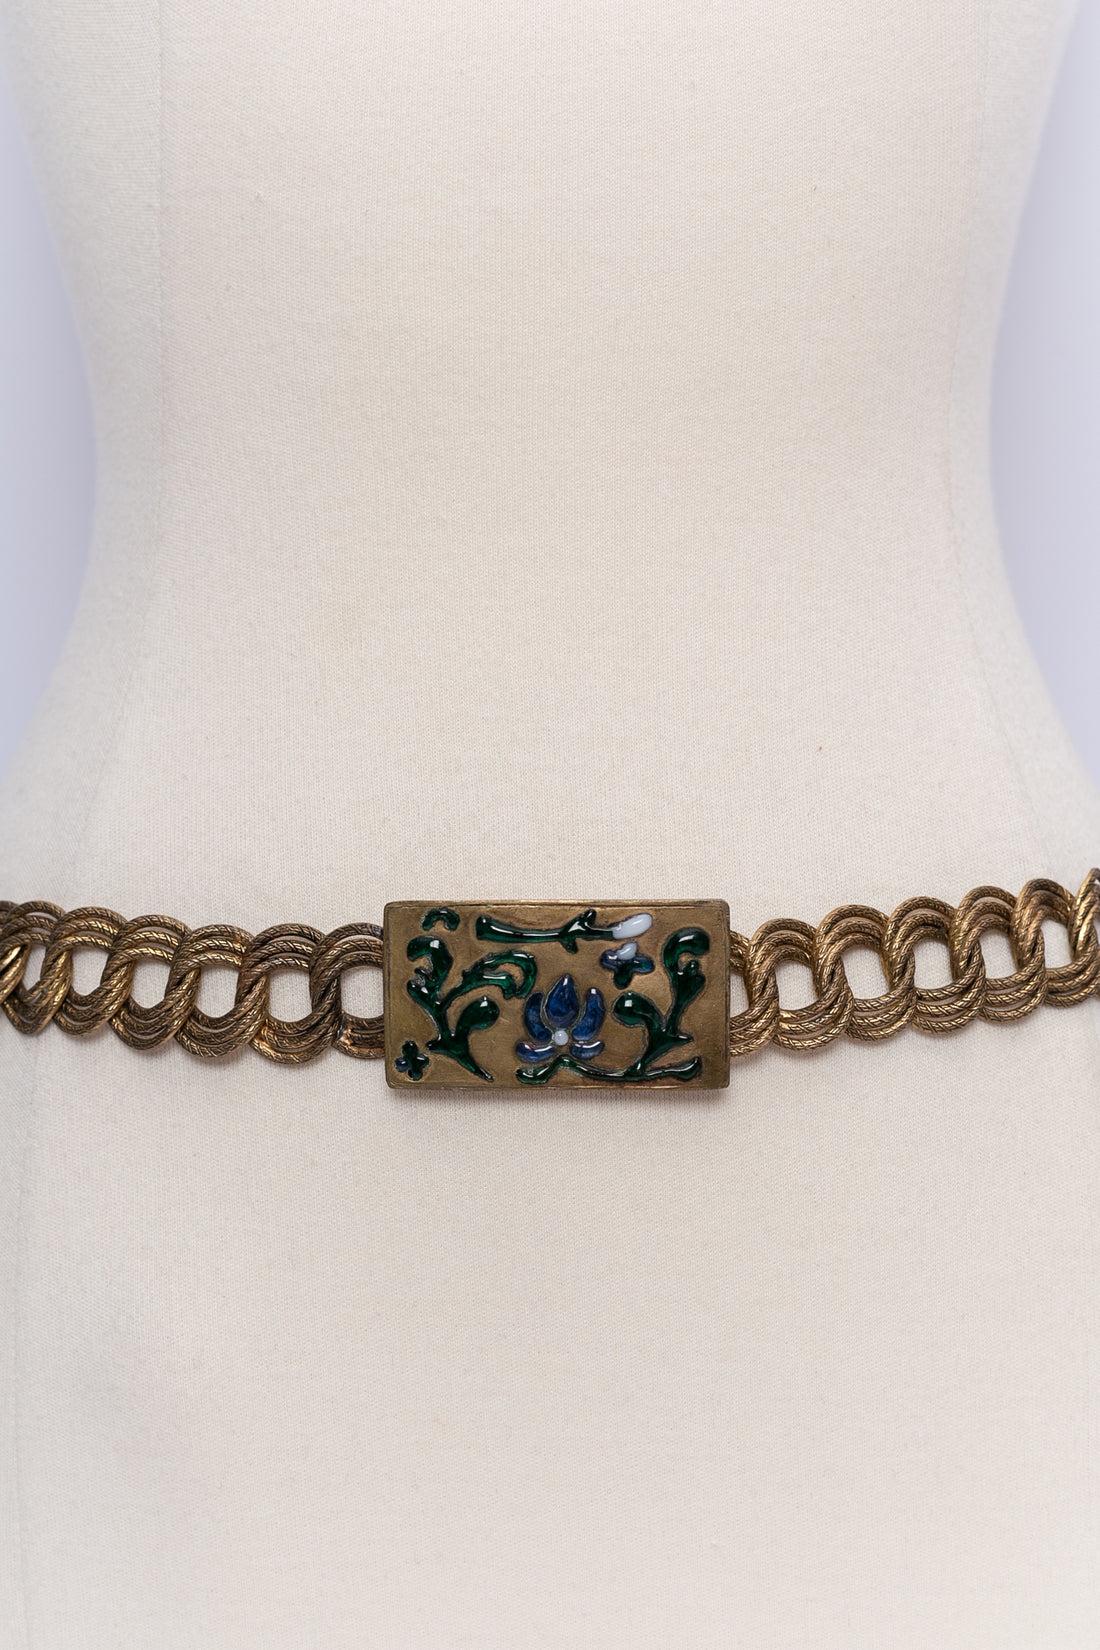 Women's Ancient Belt in Gilded Metal with Buckle For Sale